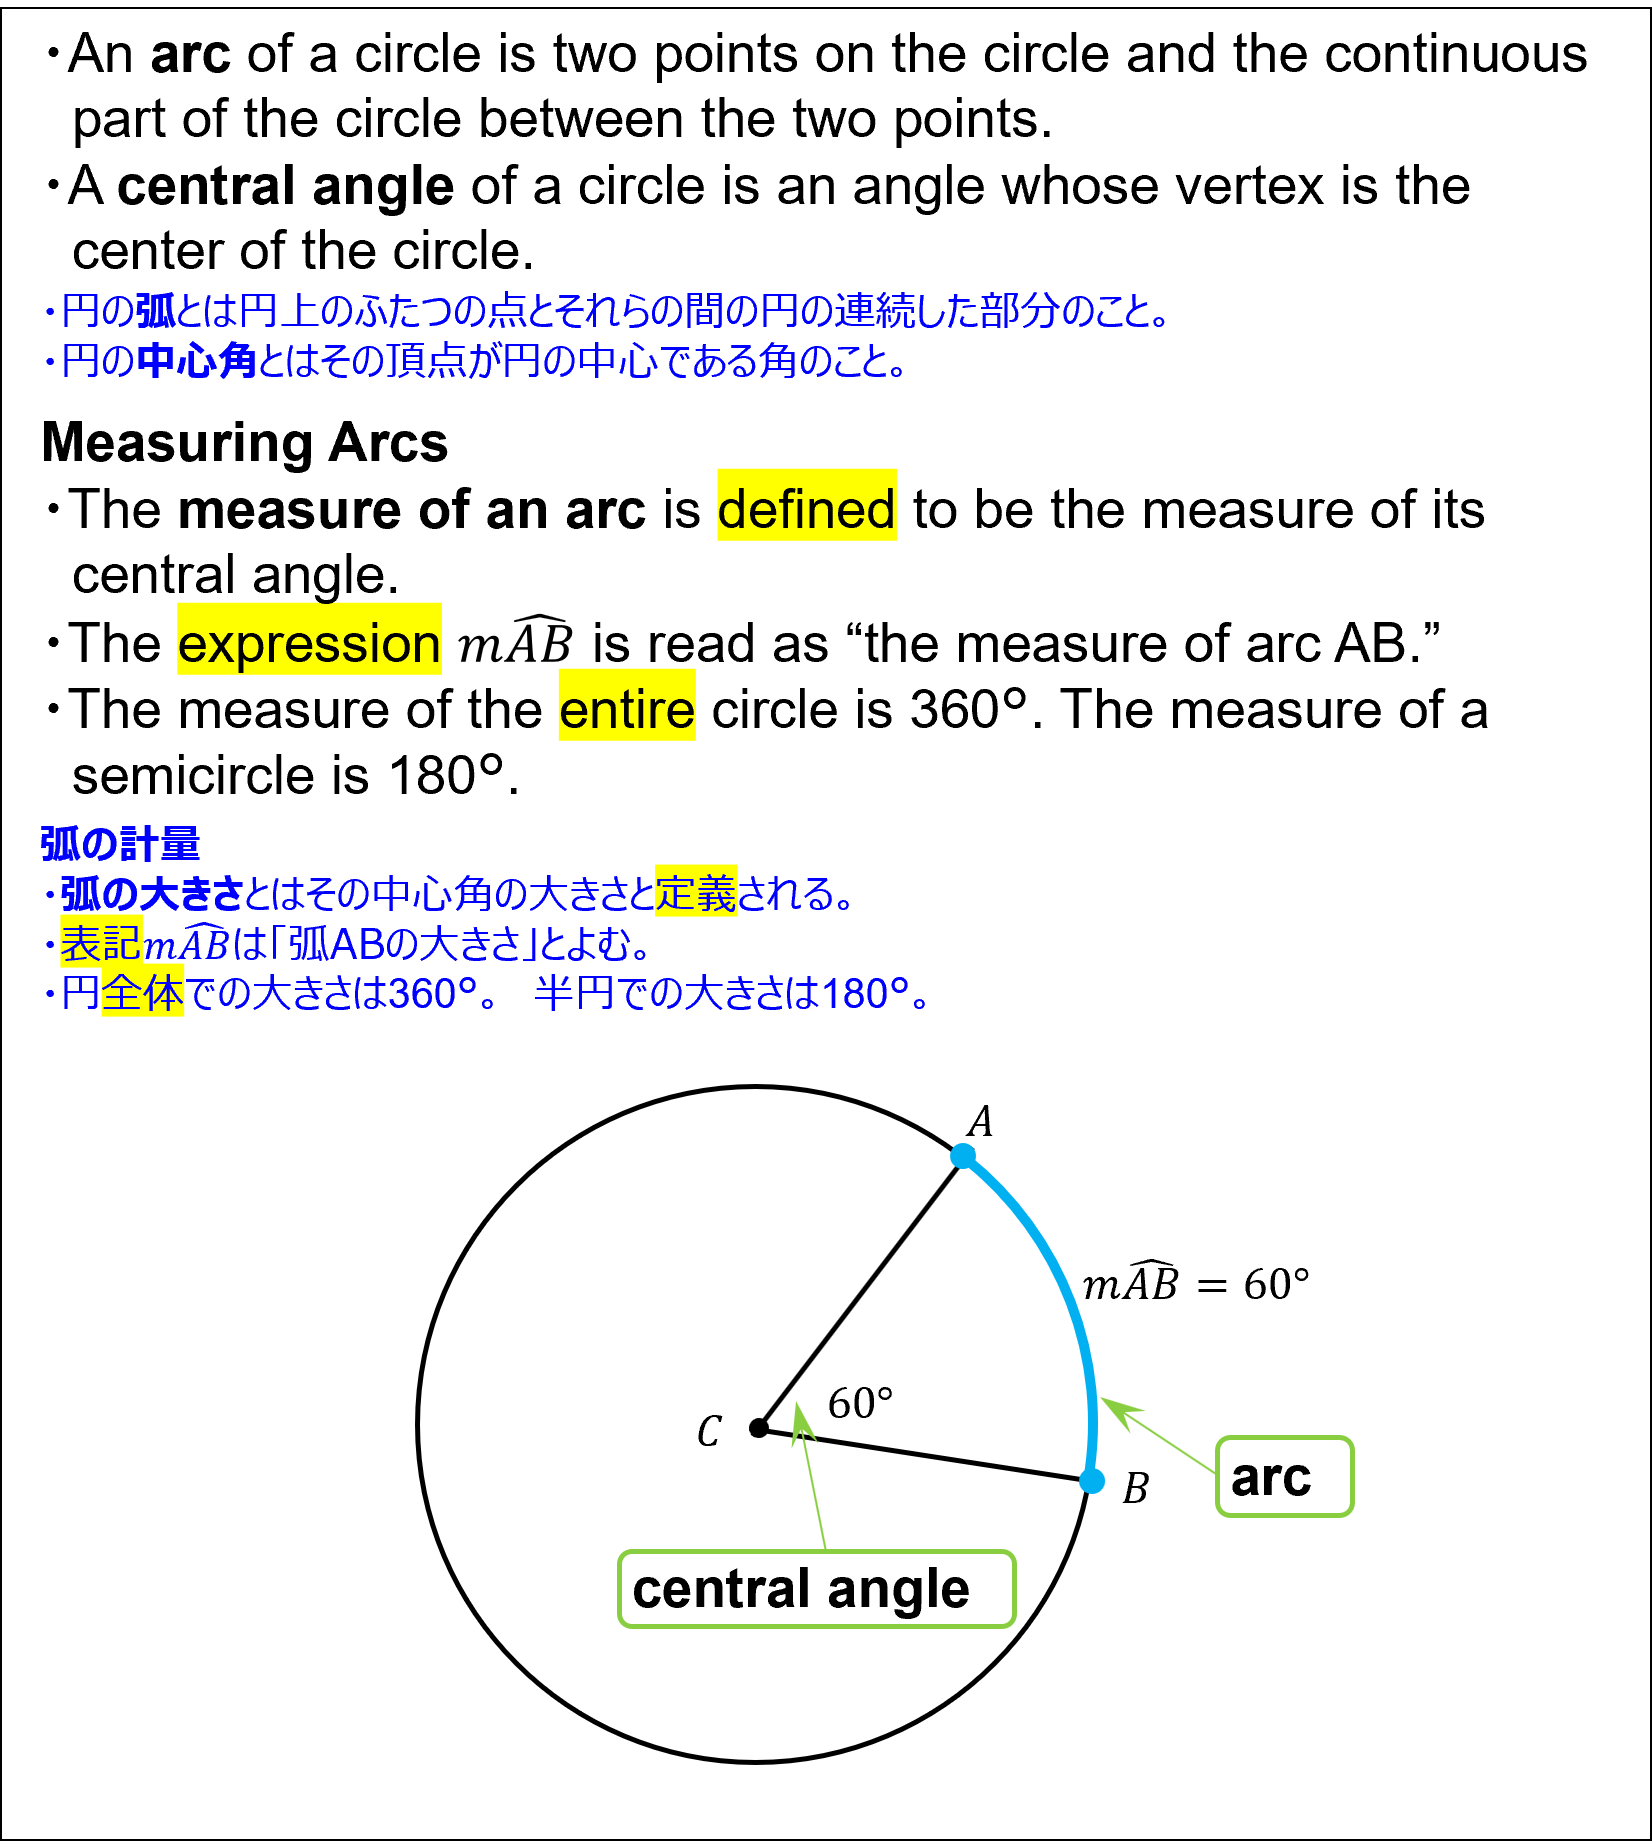 Definition of arc and its measure